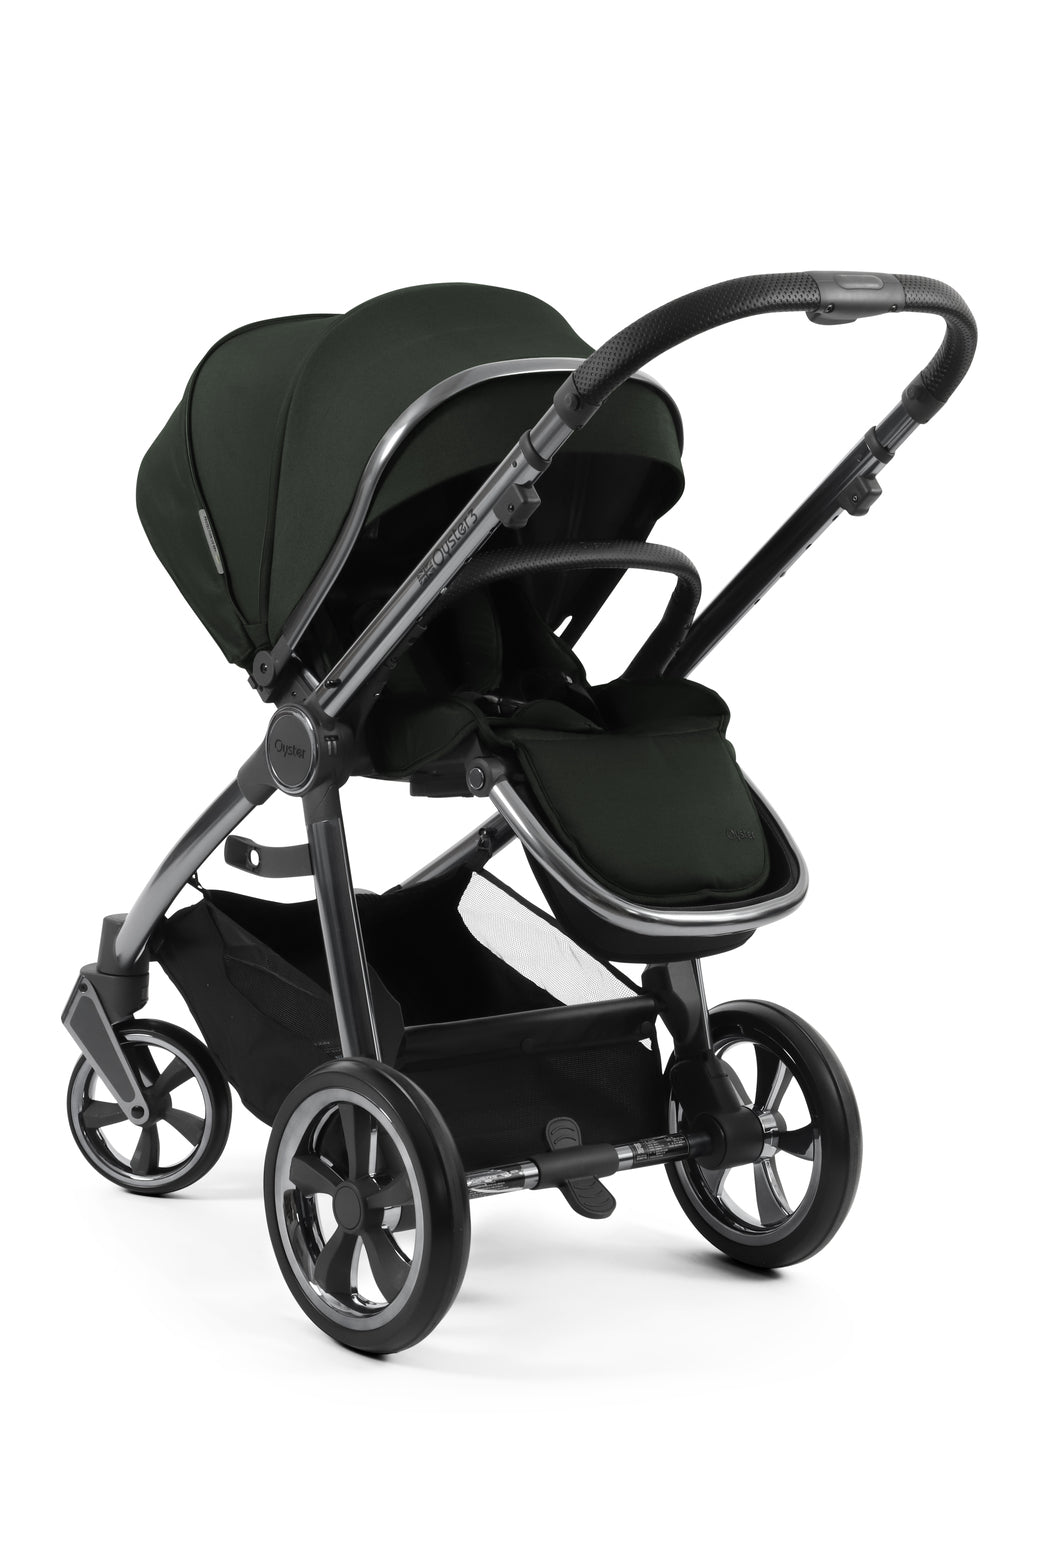 Babystyle Oyster 3 Pushchair + Carrycot - Black Olive - For Your Little One